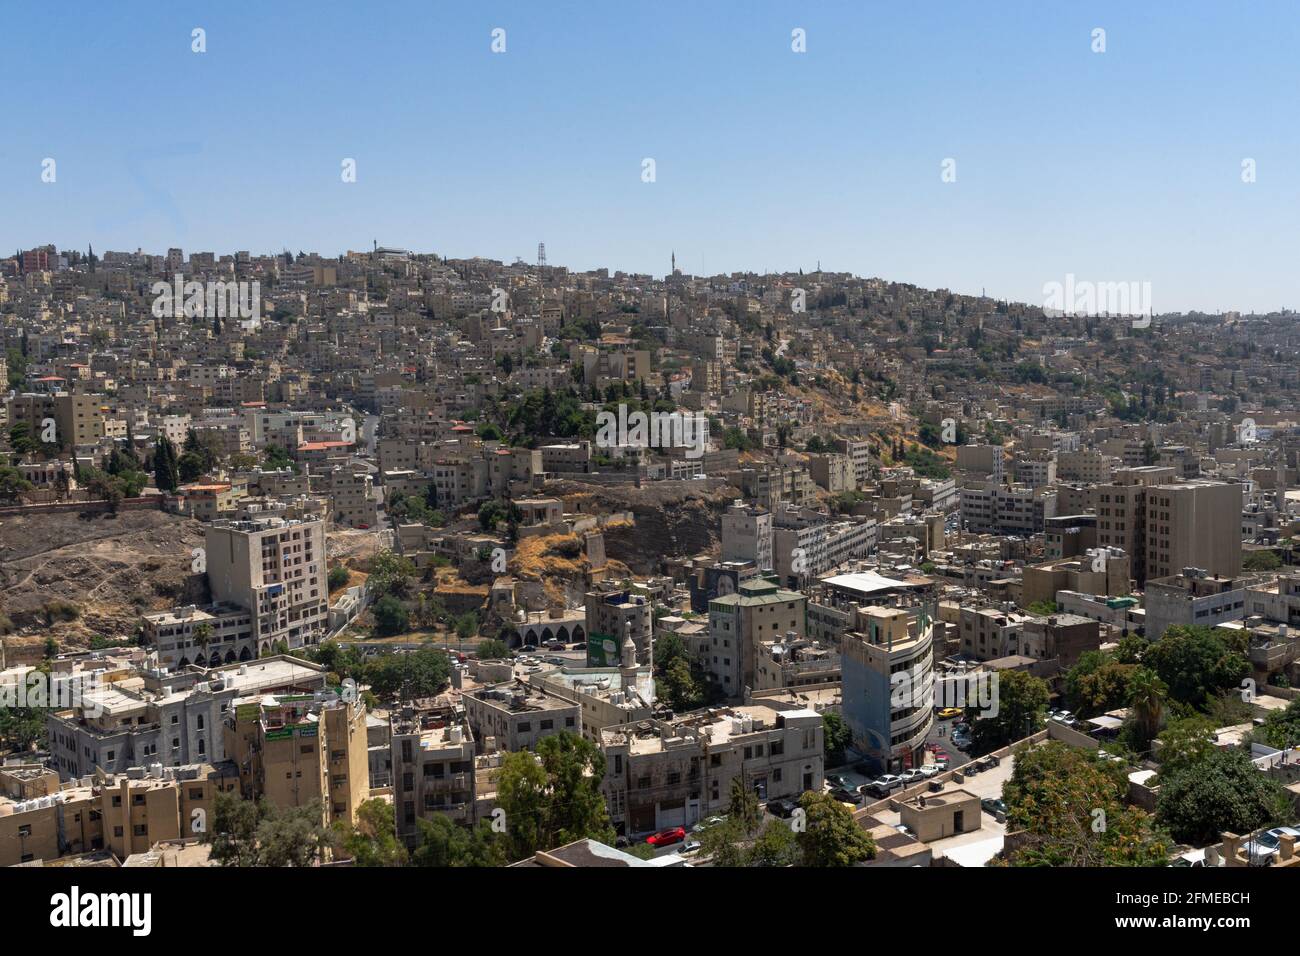 The top view of hillside residential complexes in Abdali area in amman, Jordan Stock Photo